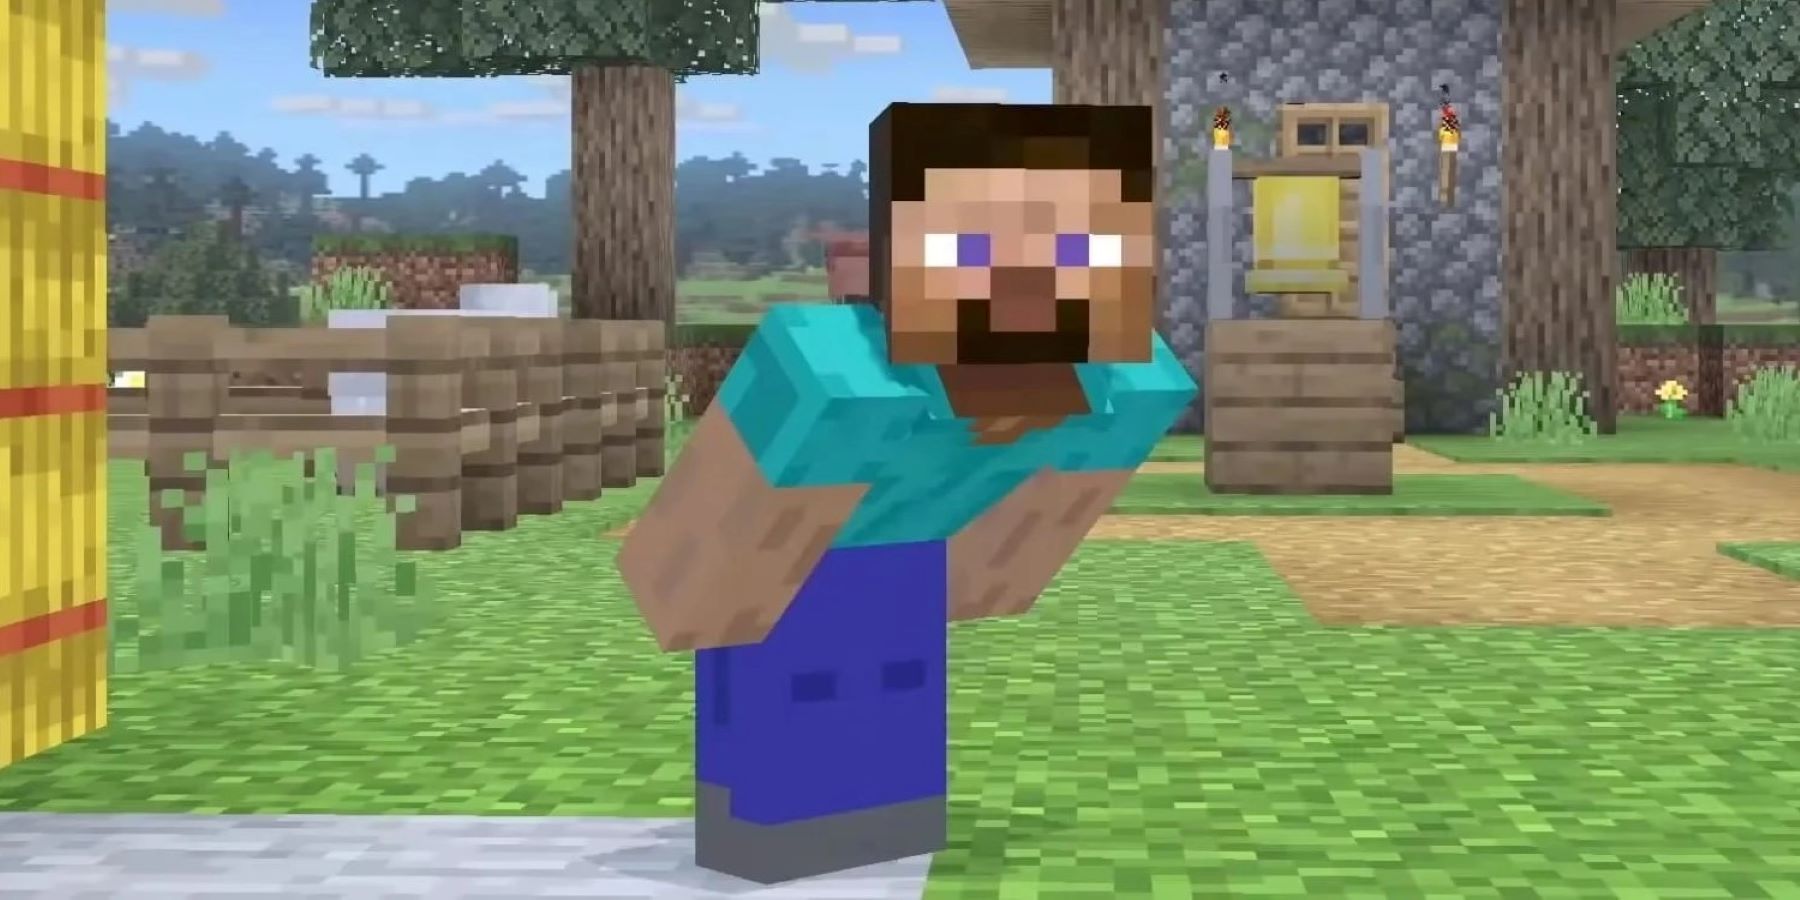 Minecraft's Steve crouching on the Minecraft stage in Super Smash Bros. Ultimate